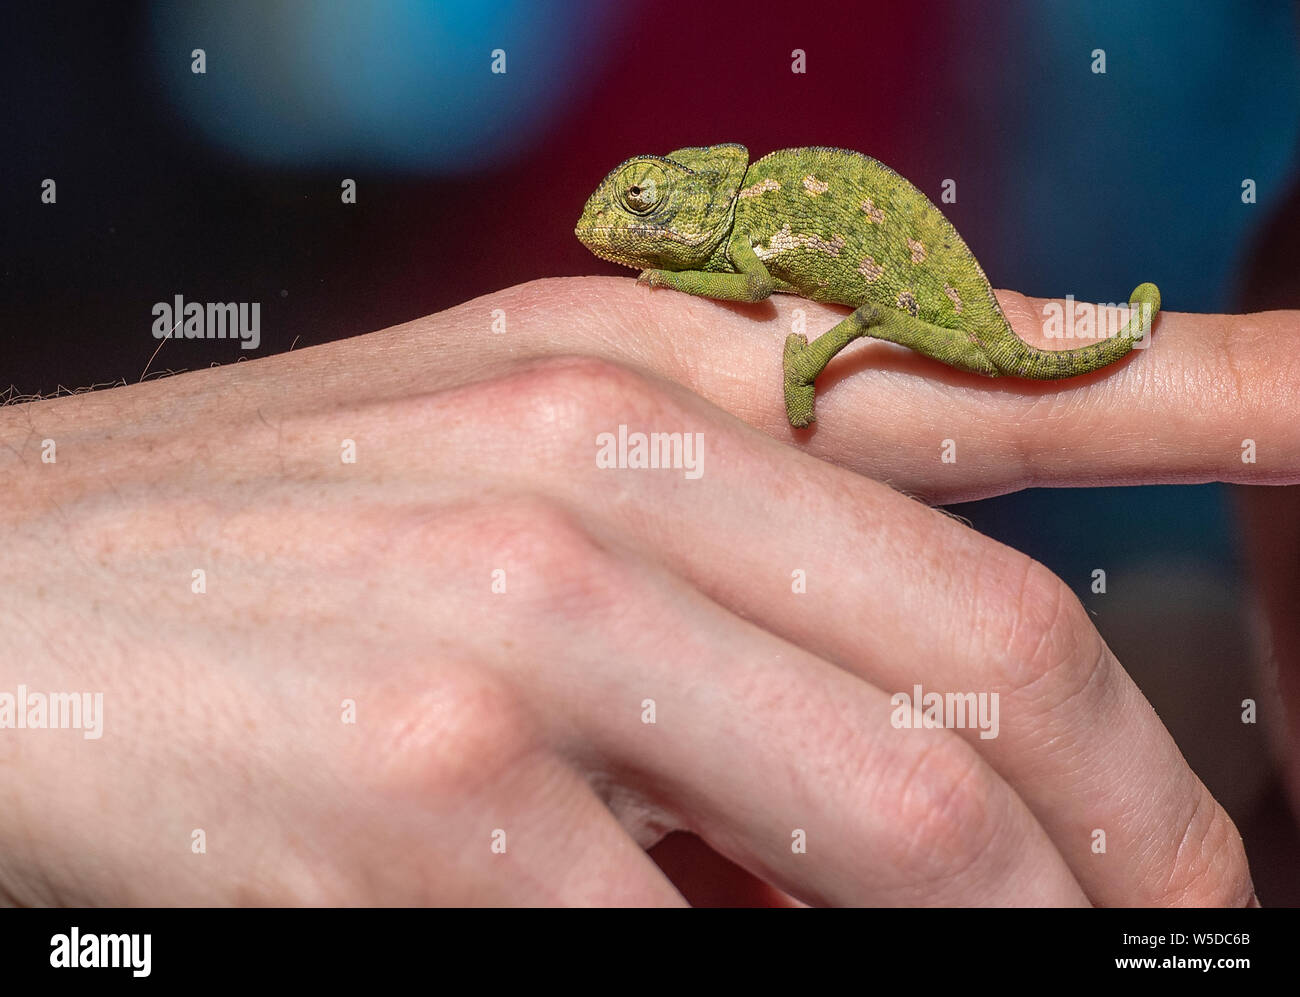 Small young Chameleon on a Human Finger wild green Chameleon Stock Photo